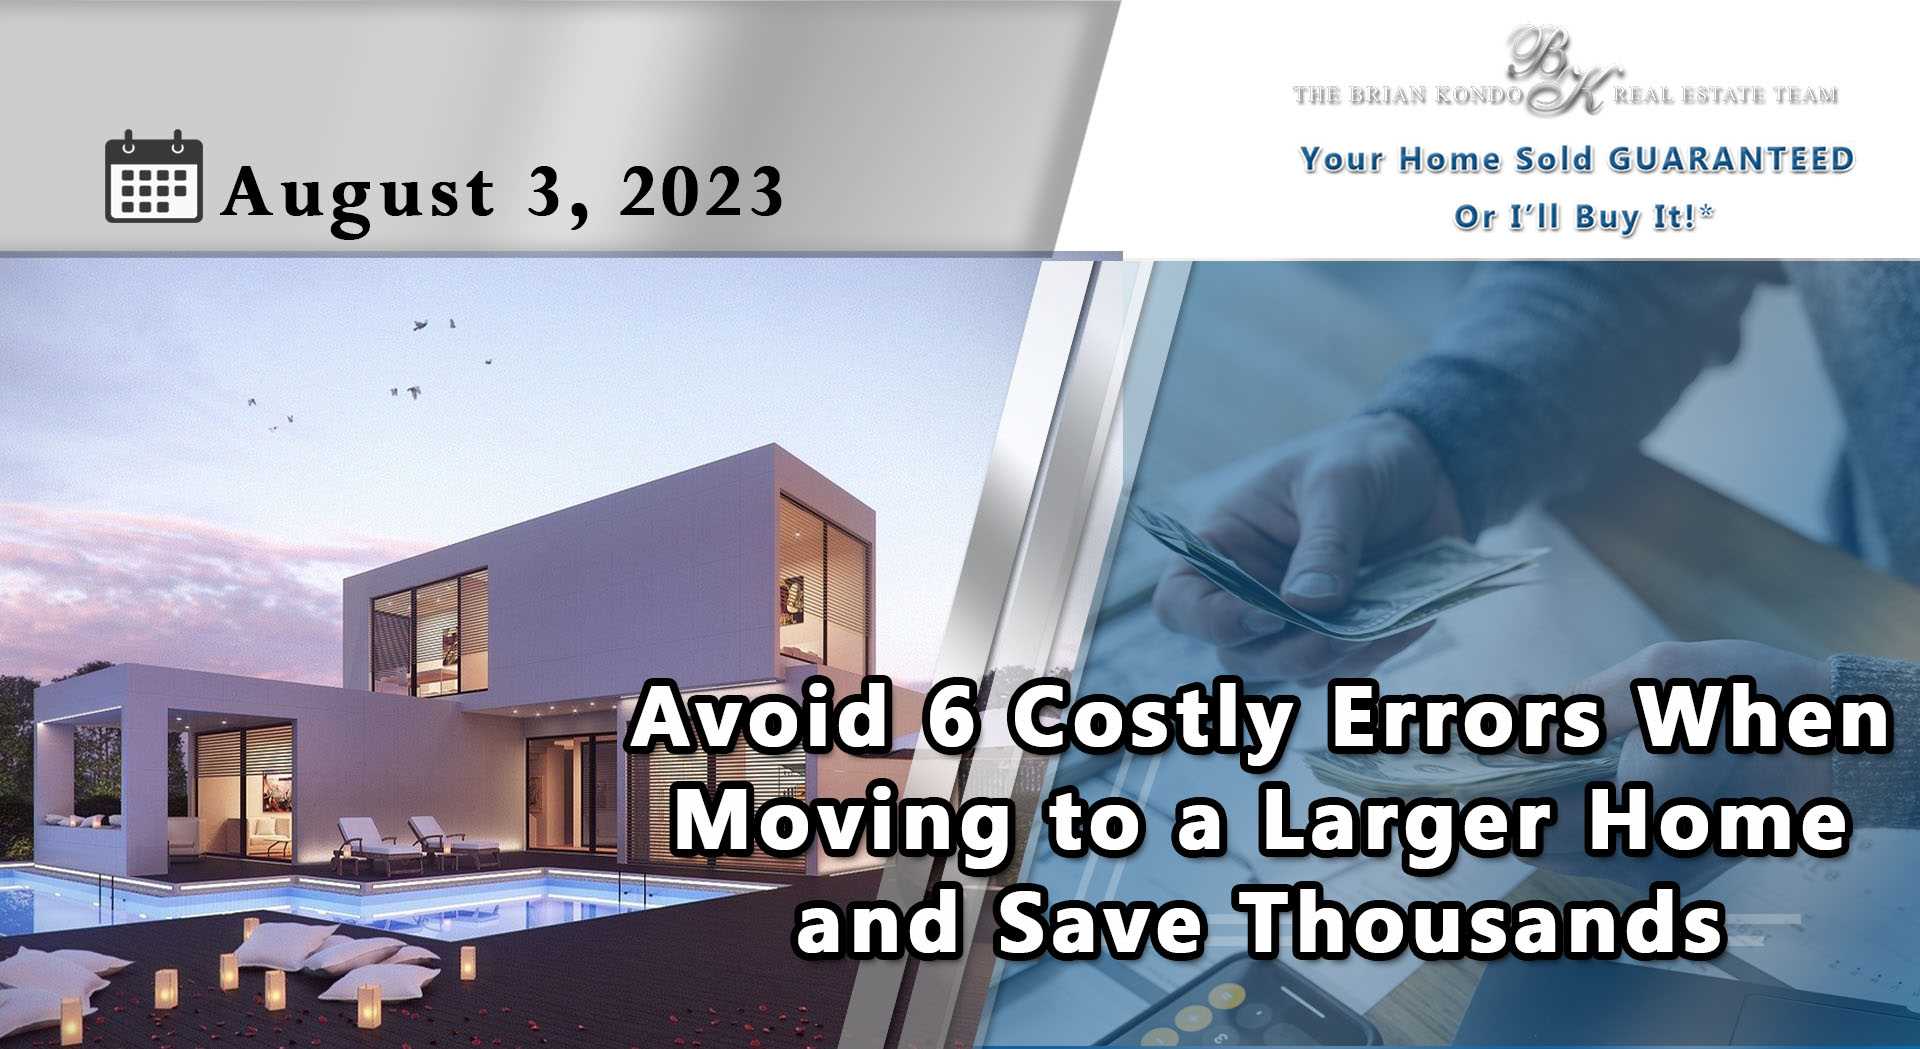 Avoid 6 Costly Errors When Moving to a Larger Home and Save Thousands